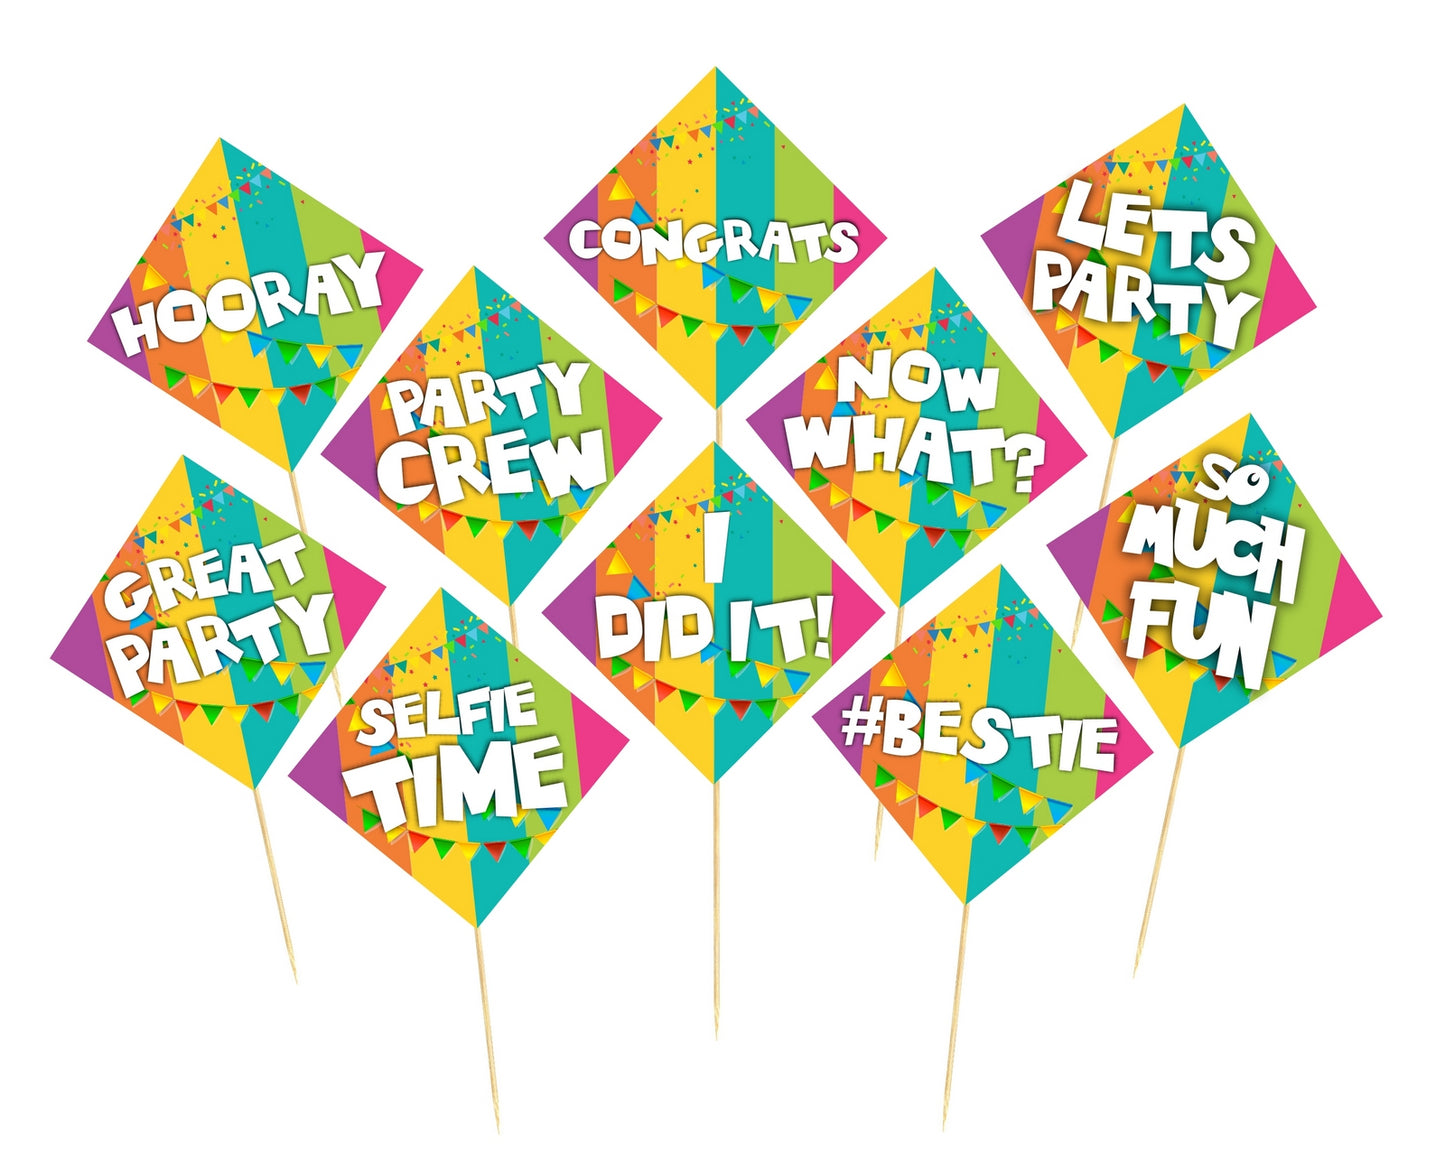 Congrats Photo Booth Party Props Theme Party Decoration, Photo Booth Party Item for Adults and Kids